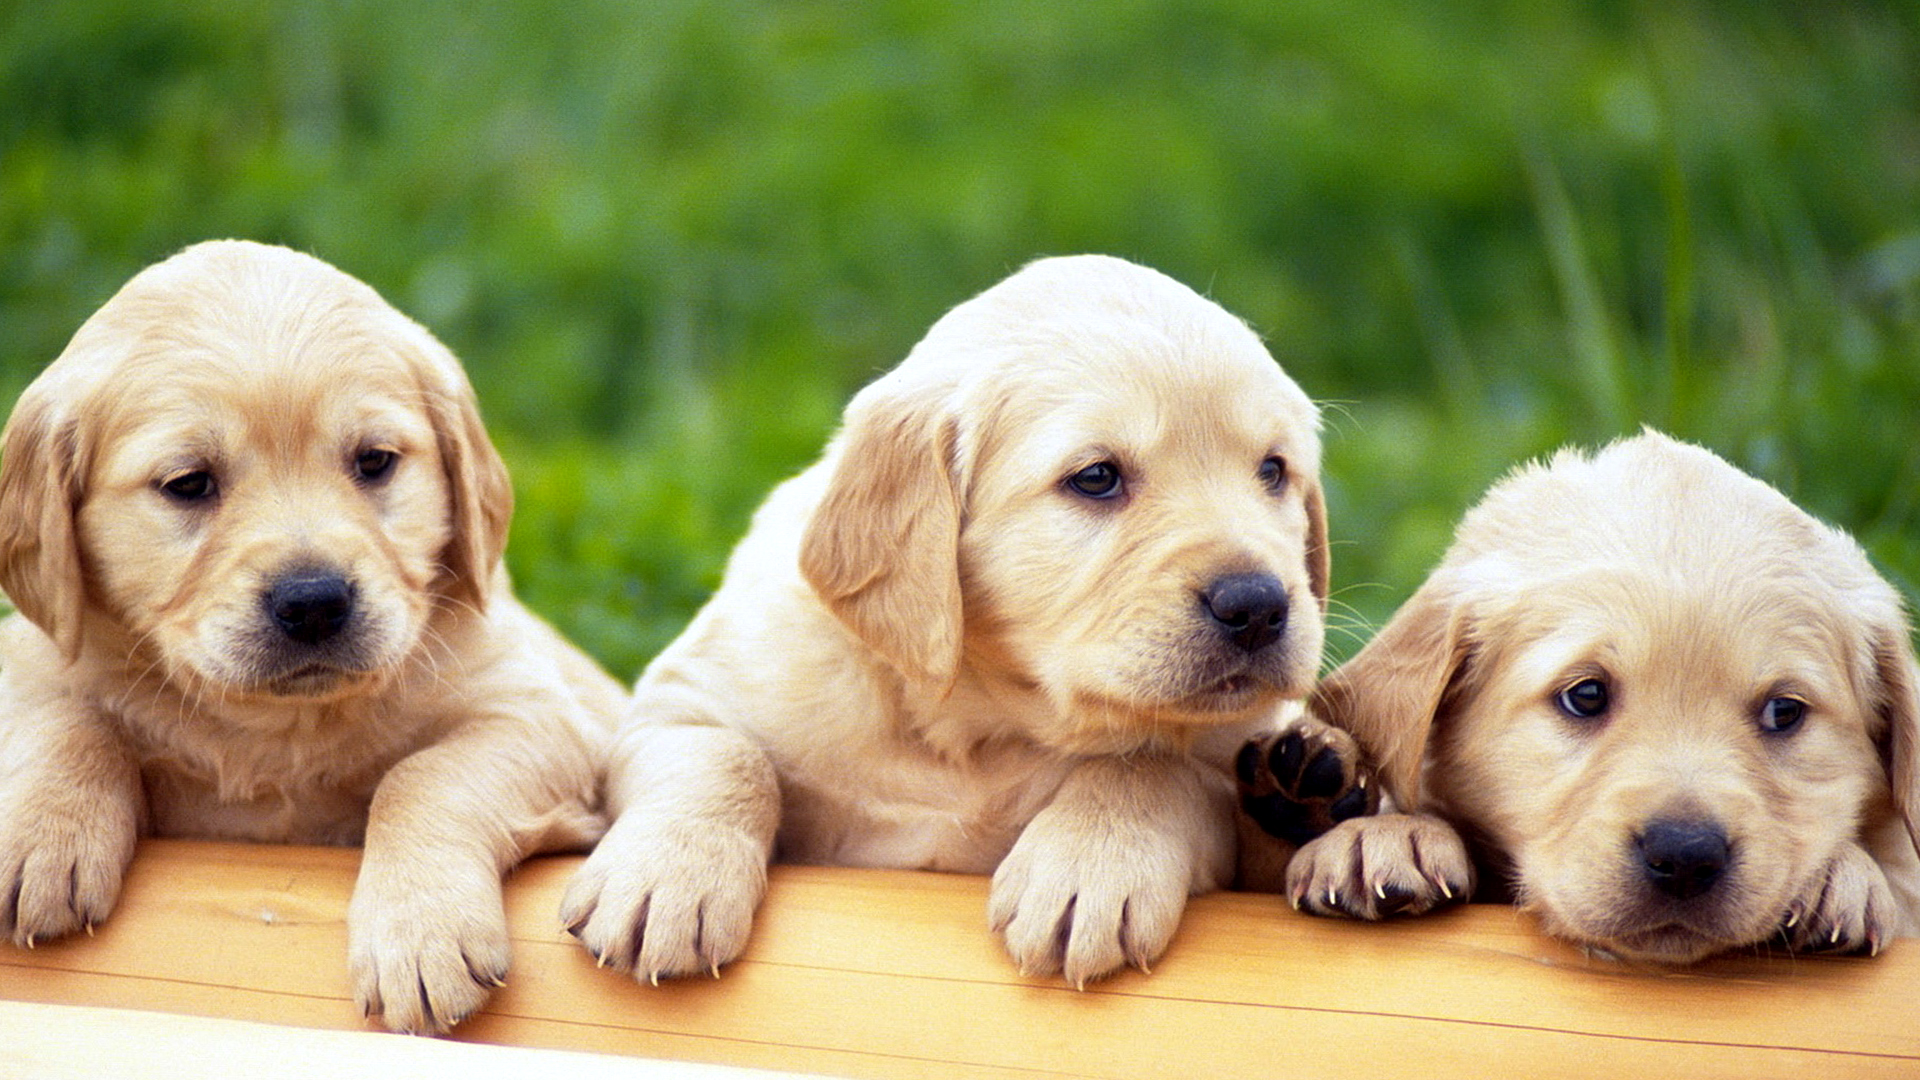 Cute Puppies Dogs Wallpaper